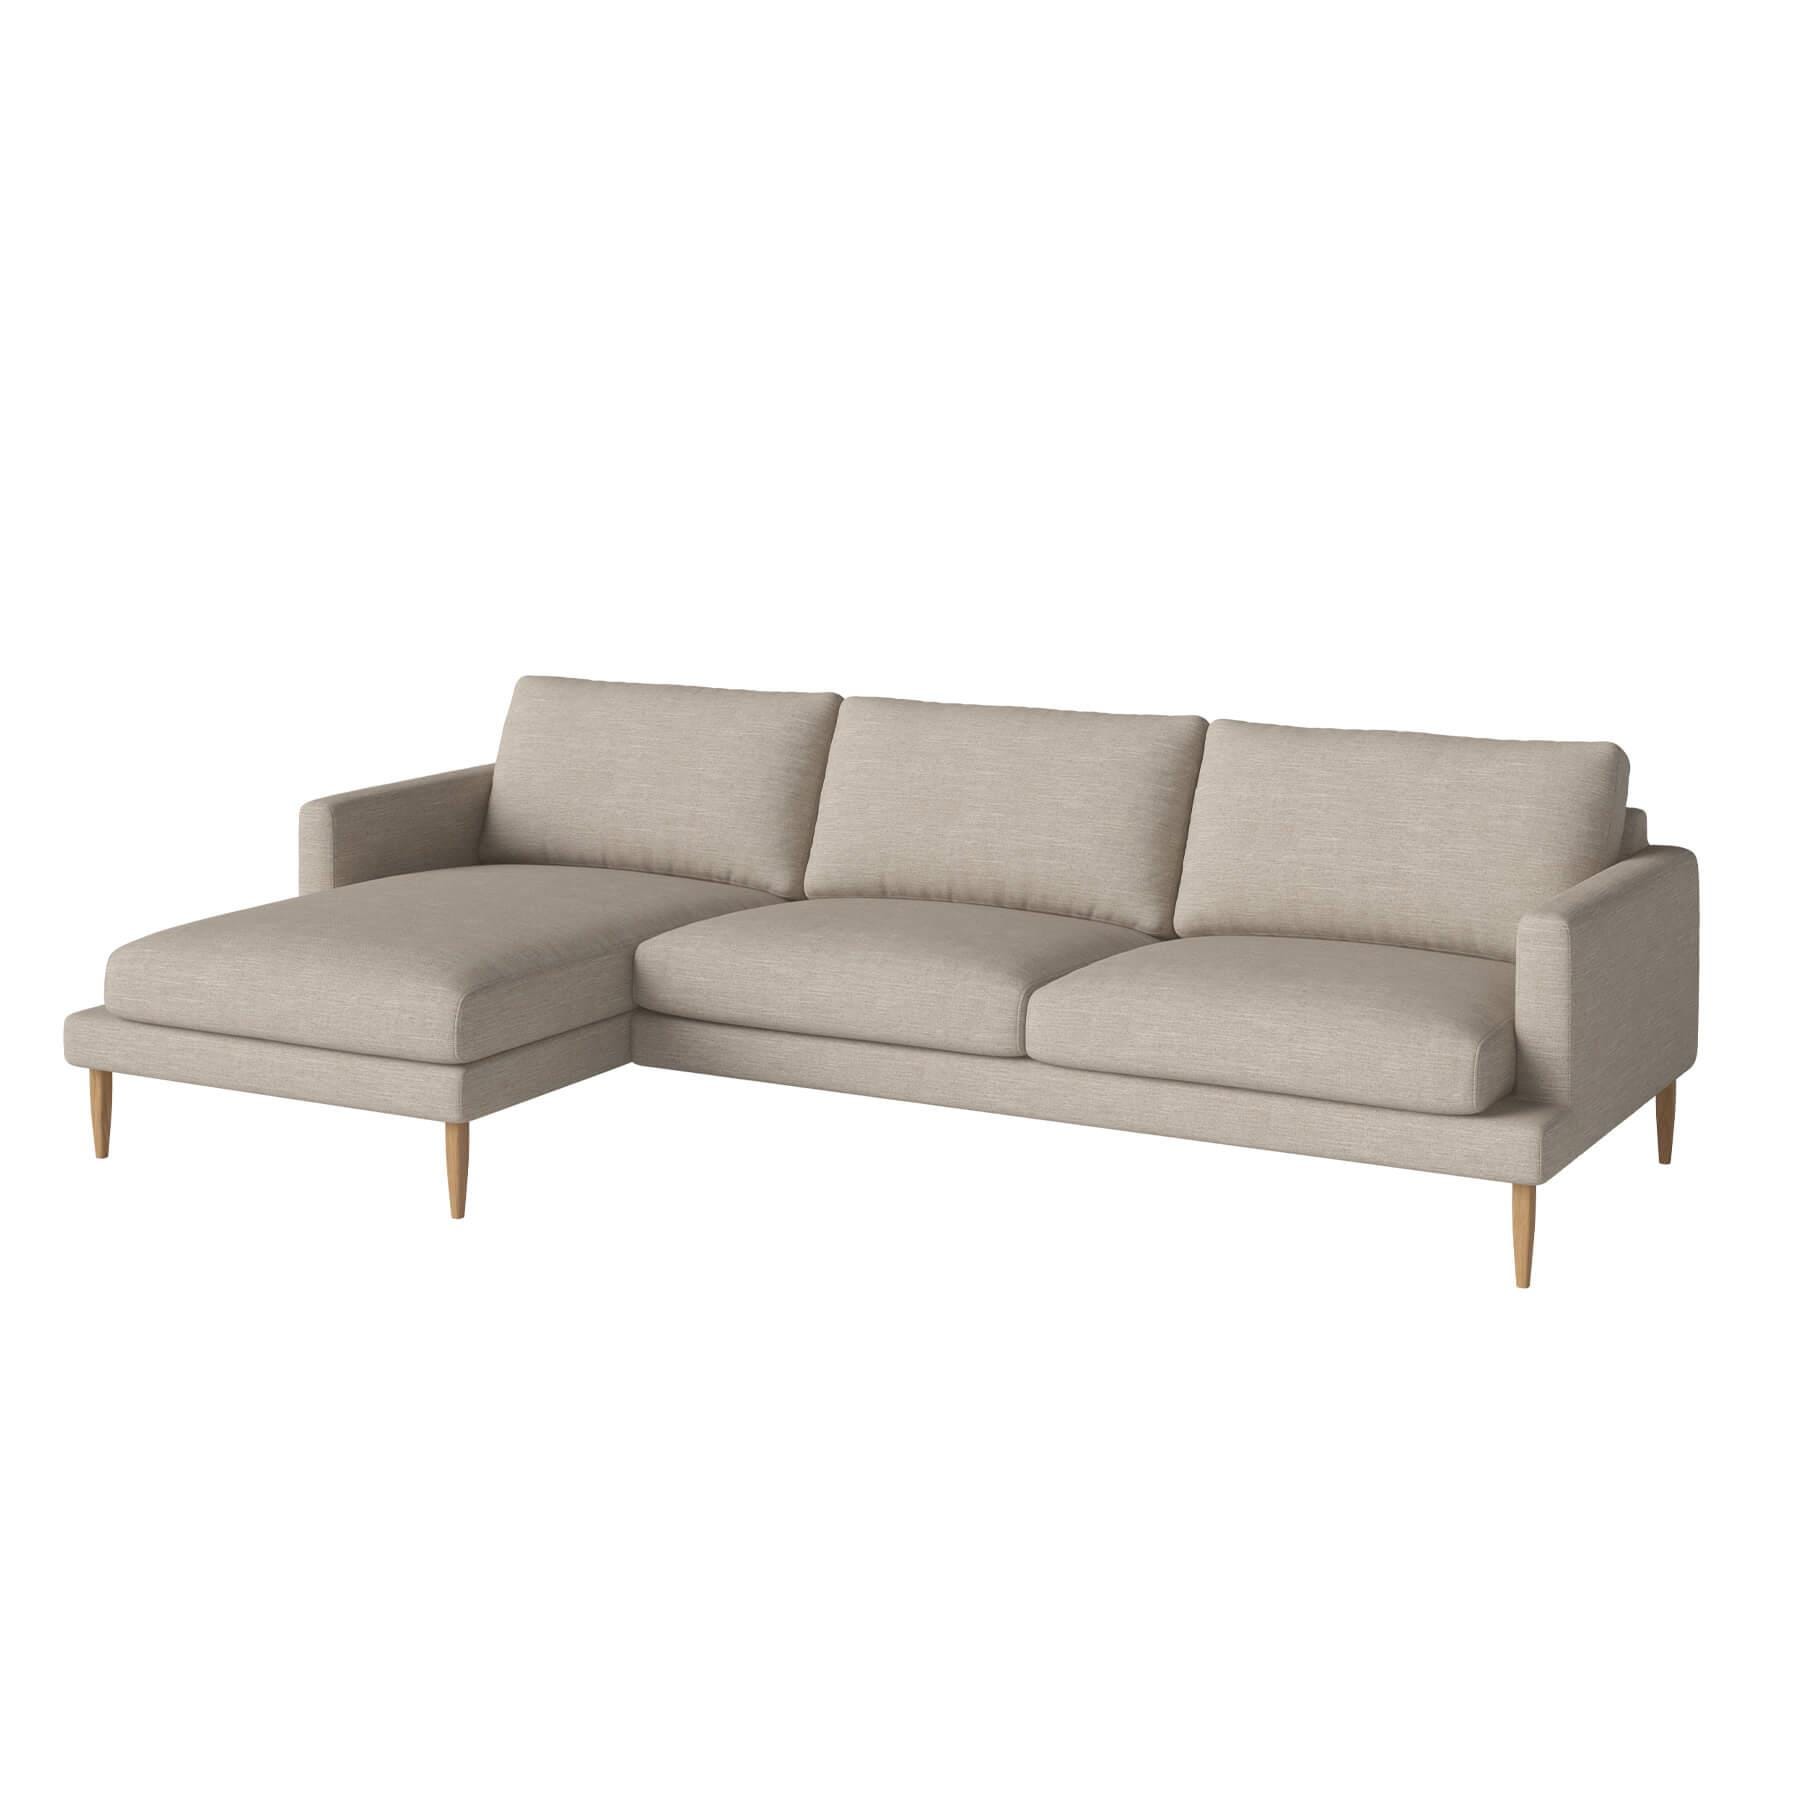 Bolia Veneda Sofa 35 Seater Sofa With Chaise Longue Oiled Oak Baize Sand Left Brown Designer Furniture From Holloways Of Ludlow